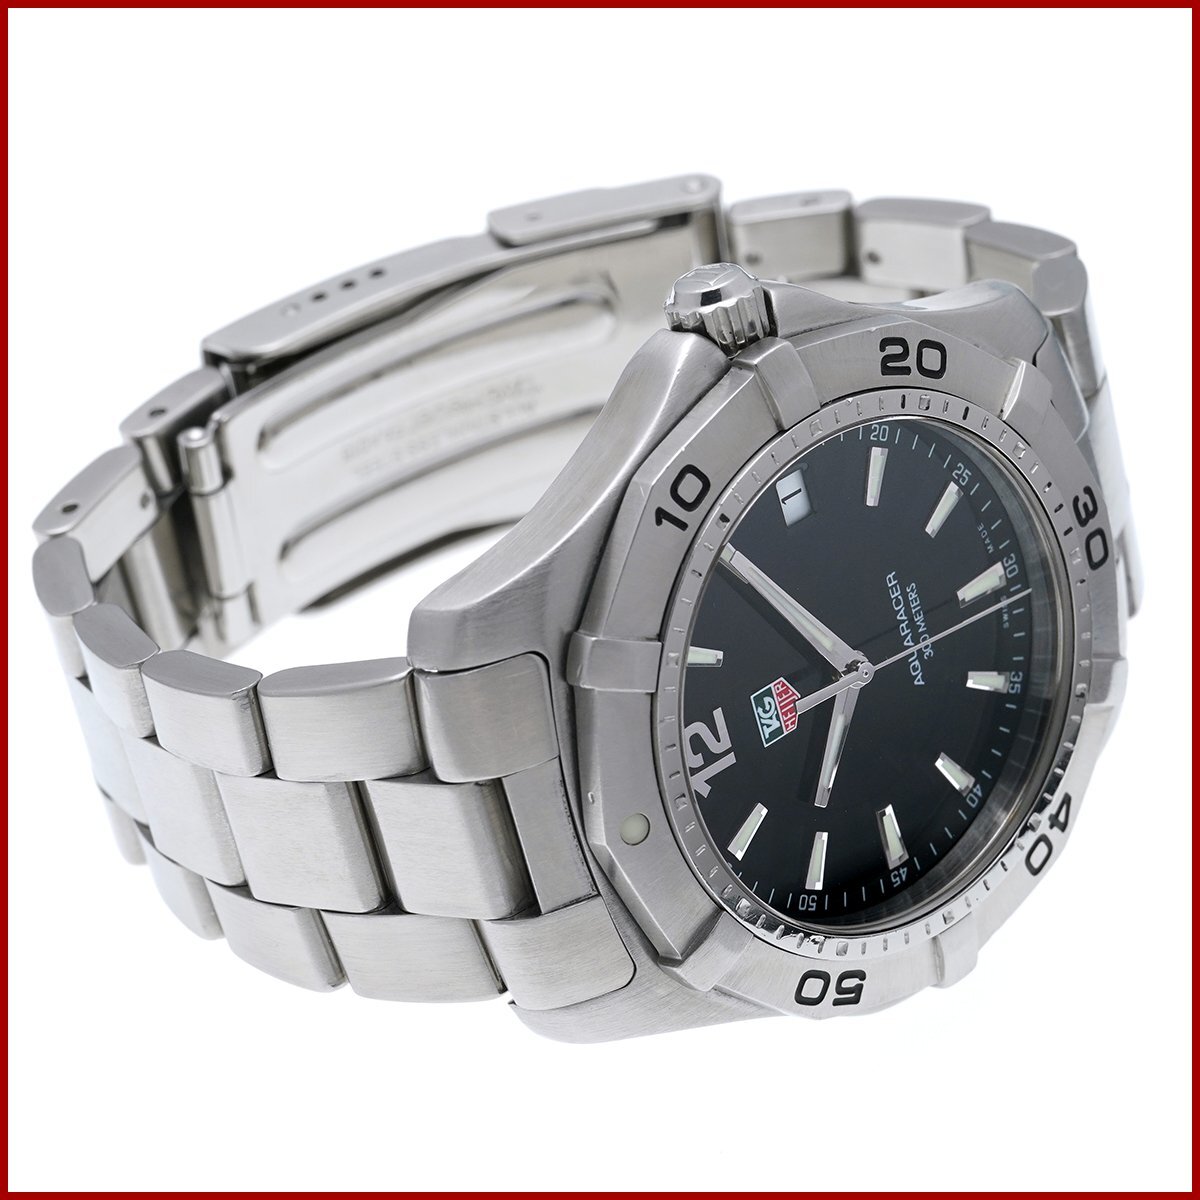  TAG Heuer men's wristwatch Aquaracer WAF1110 quartz battery type SS black face 300m waterproof arm around 16cm beautiful goods new goods has been finished 